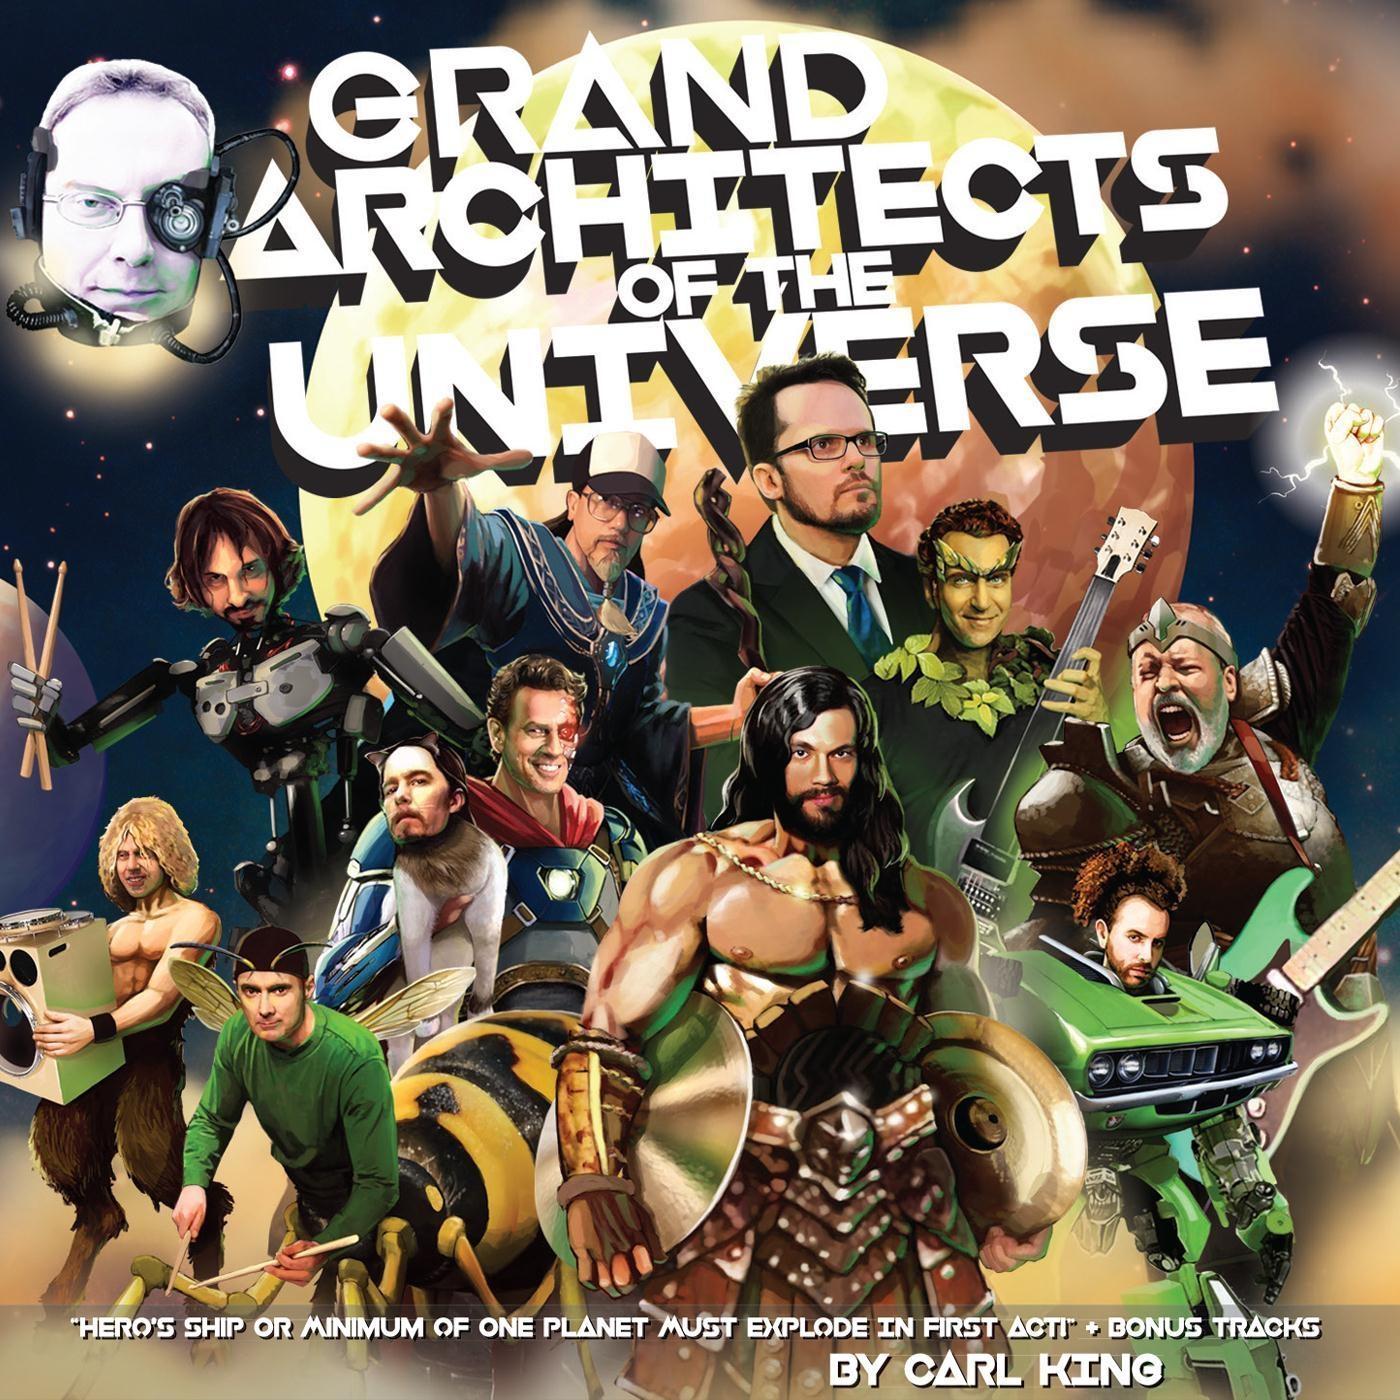 Grand Architects of the Universe